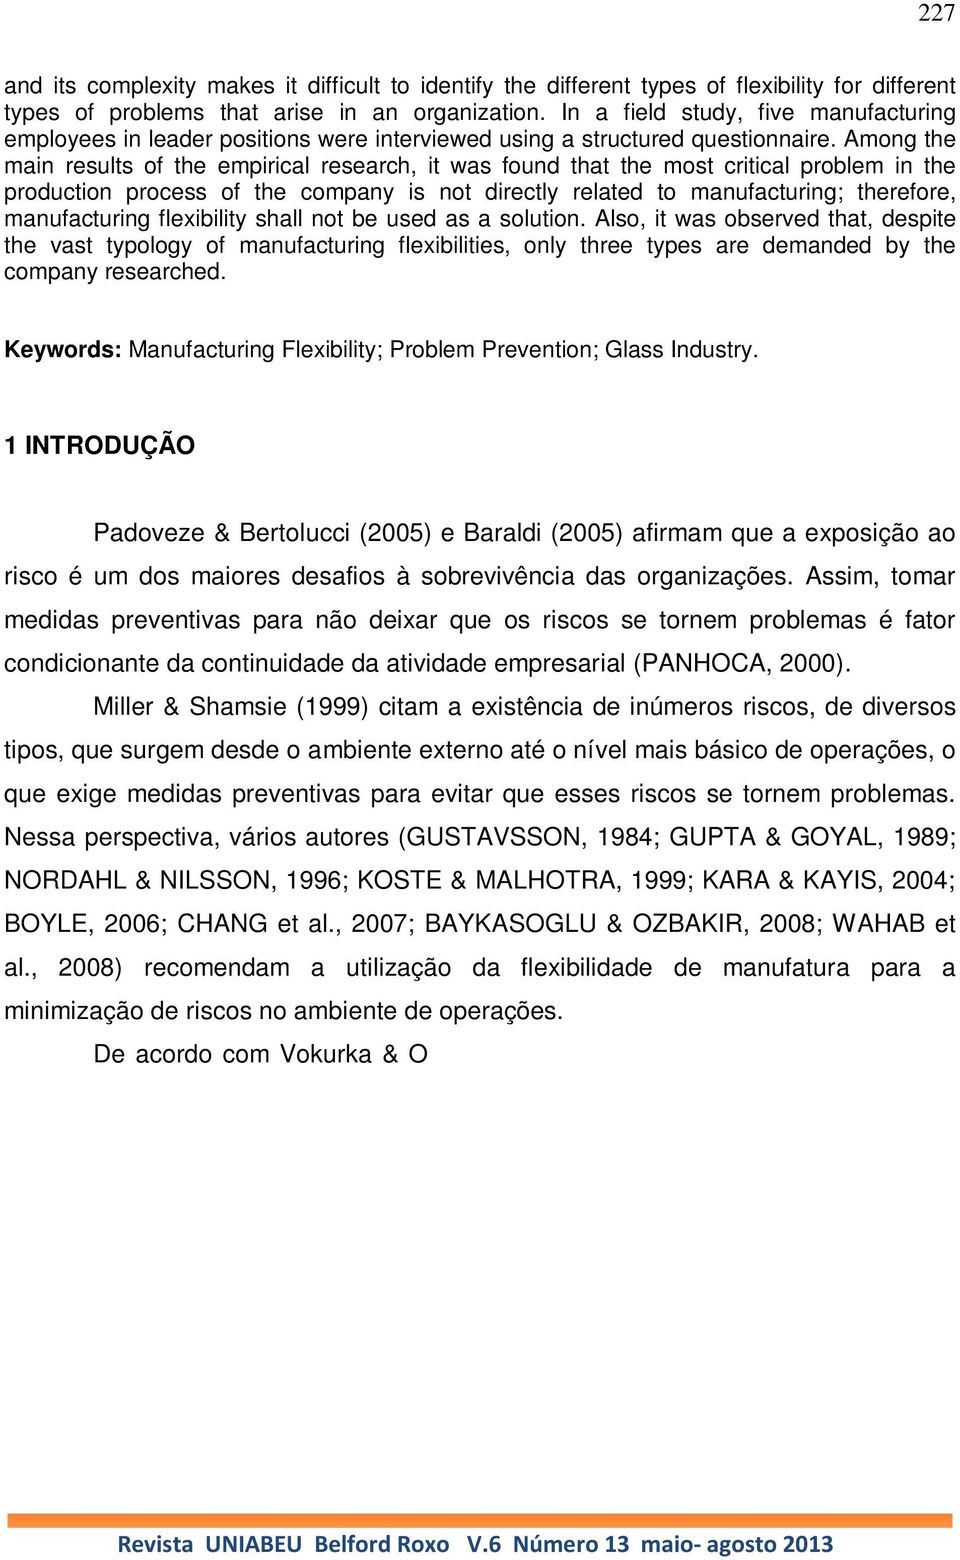 Among the main results of the empirical research, it was found that the most critical problem in the production process of the company is not directly related to manufacturing; therefore,